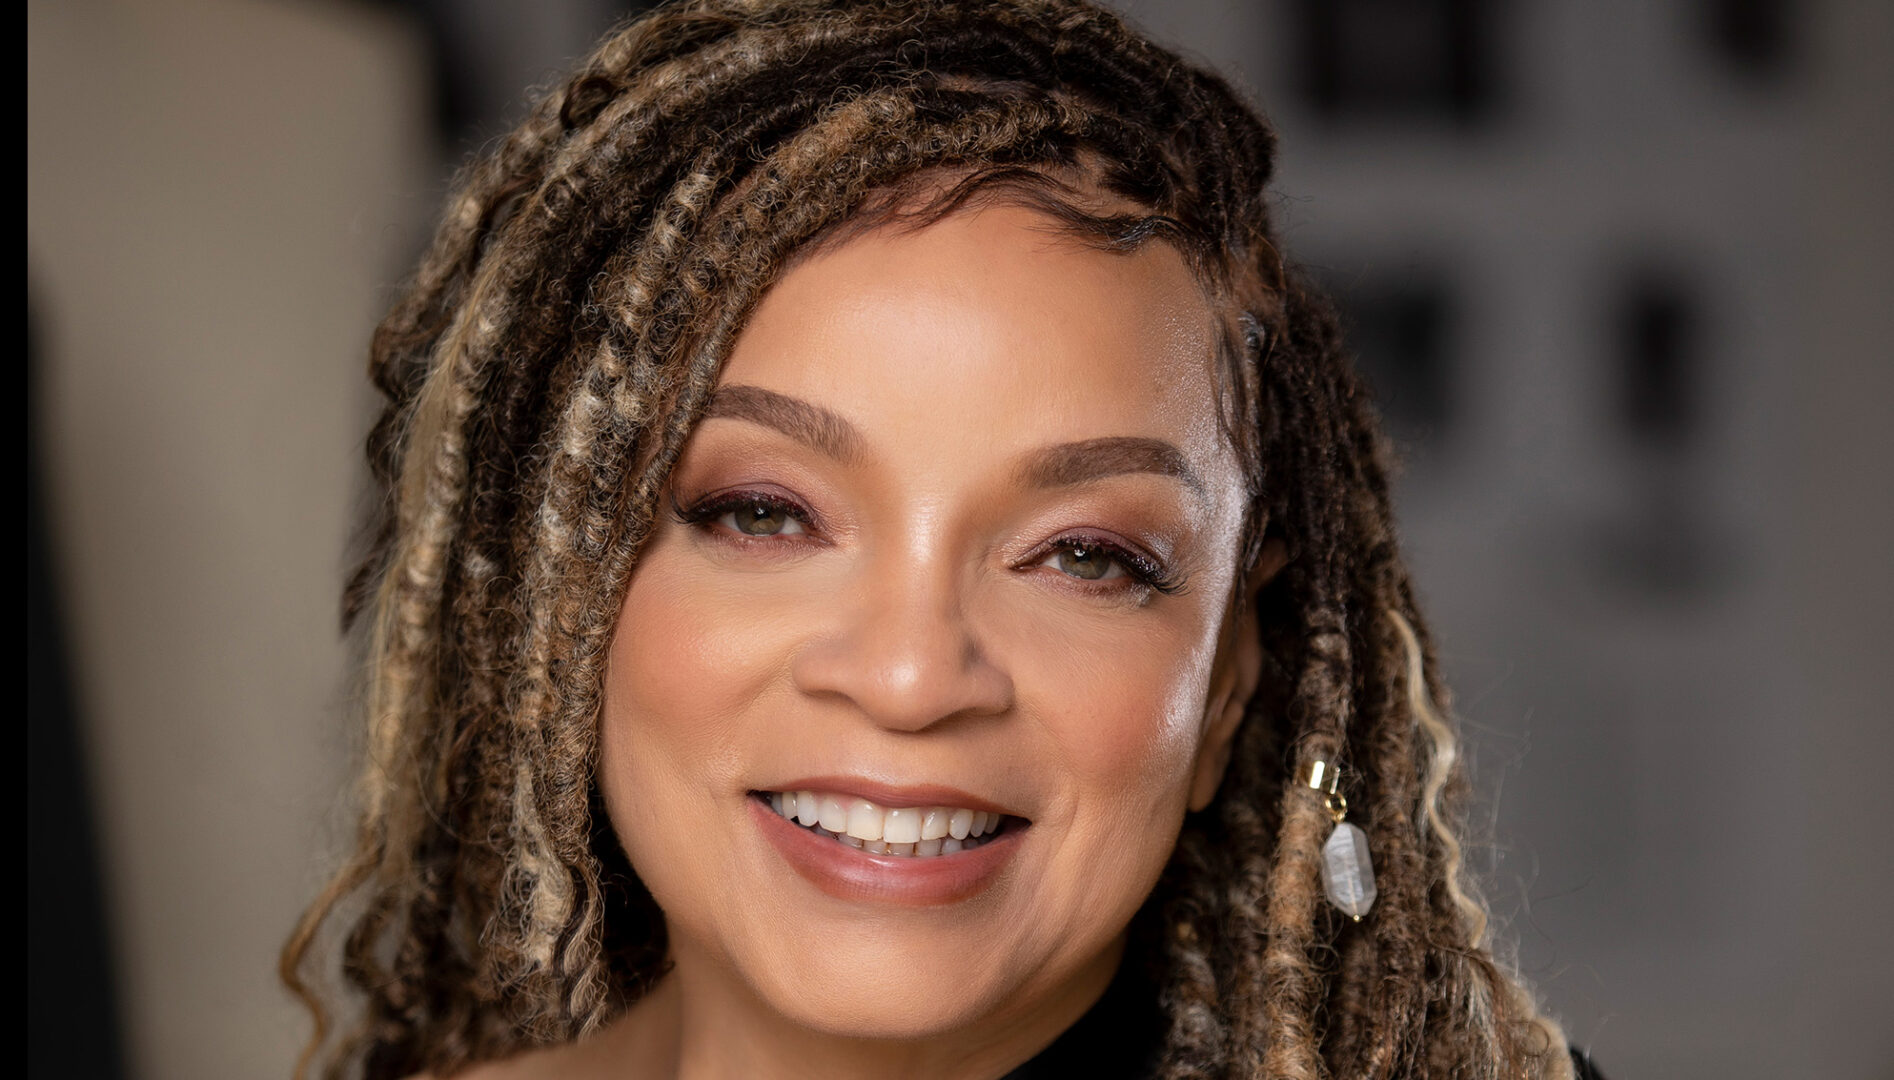 Photo of a smiling Black woman with dreadlocks